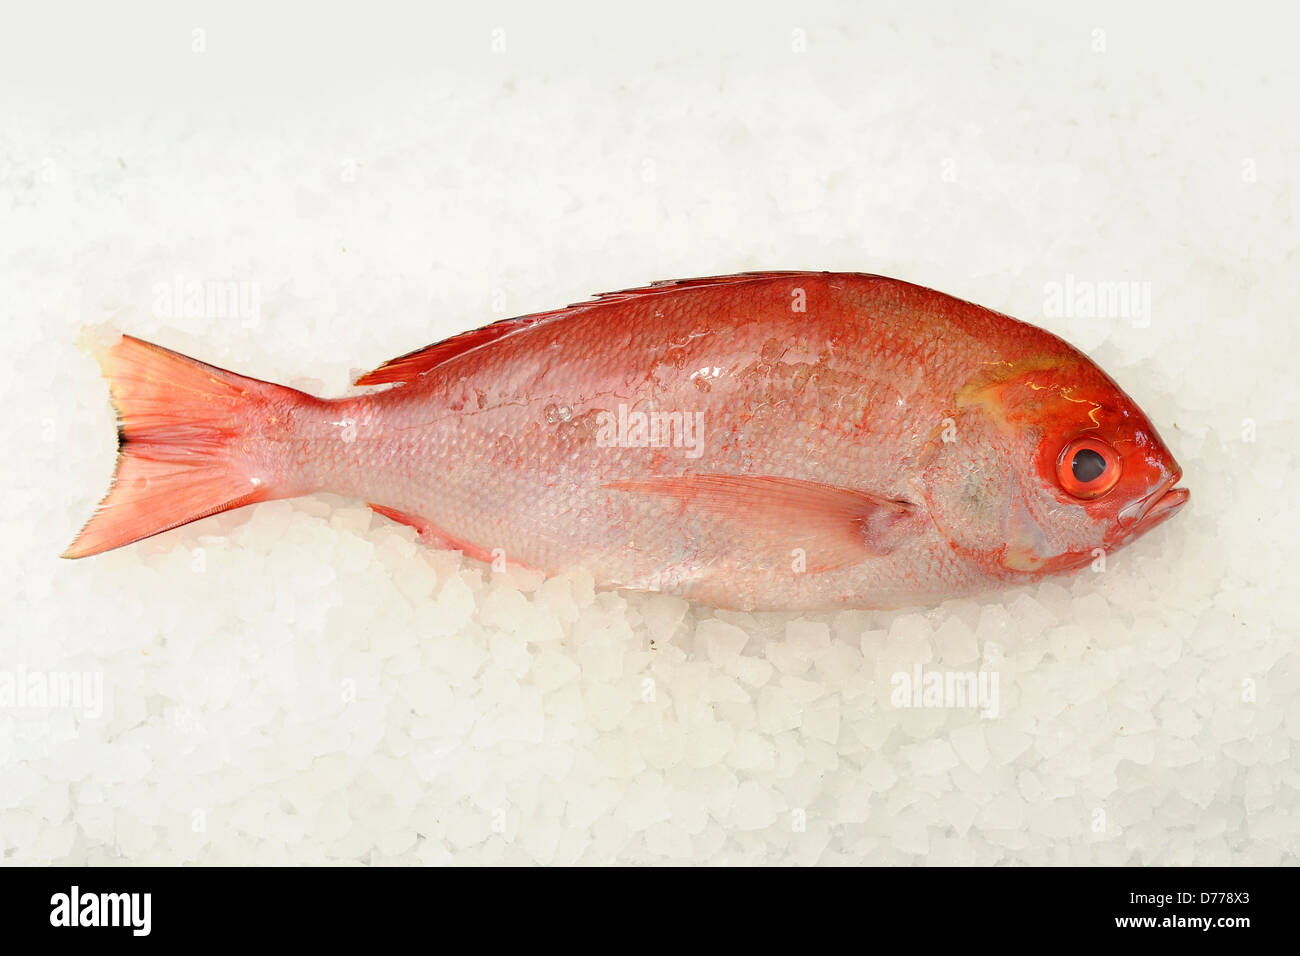 red snapper fish Stock Photo